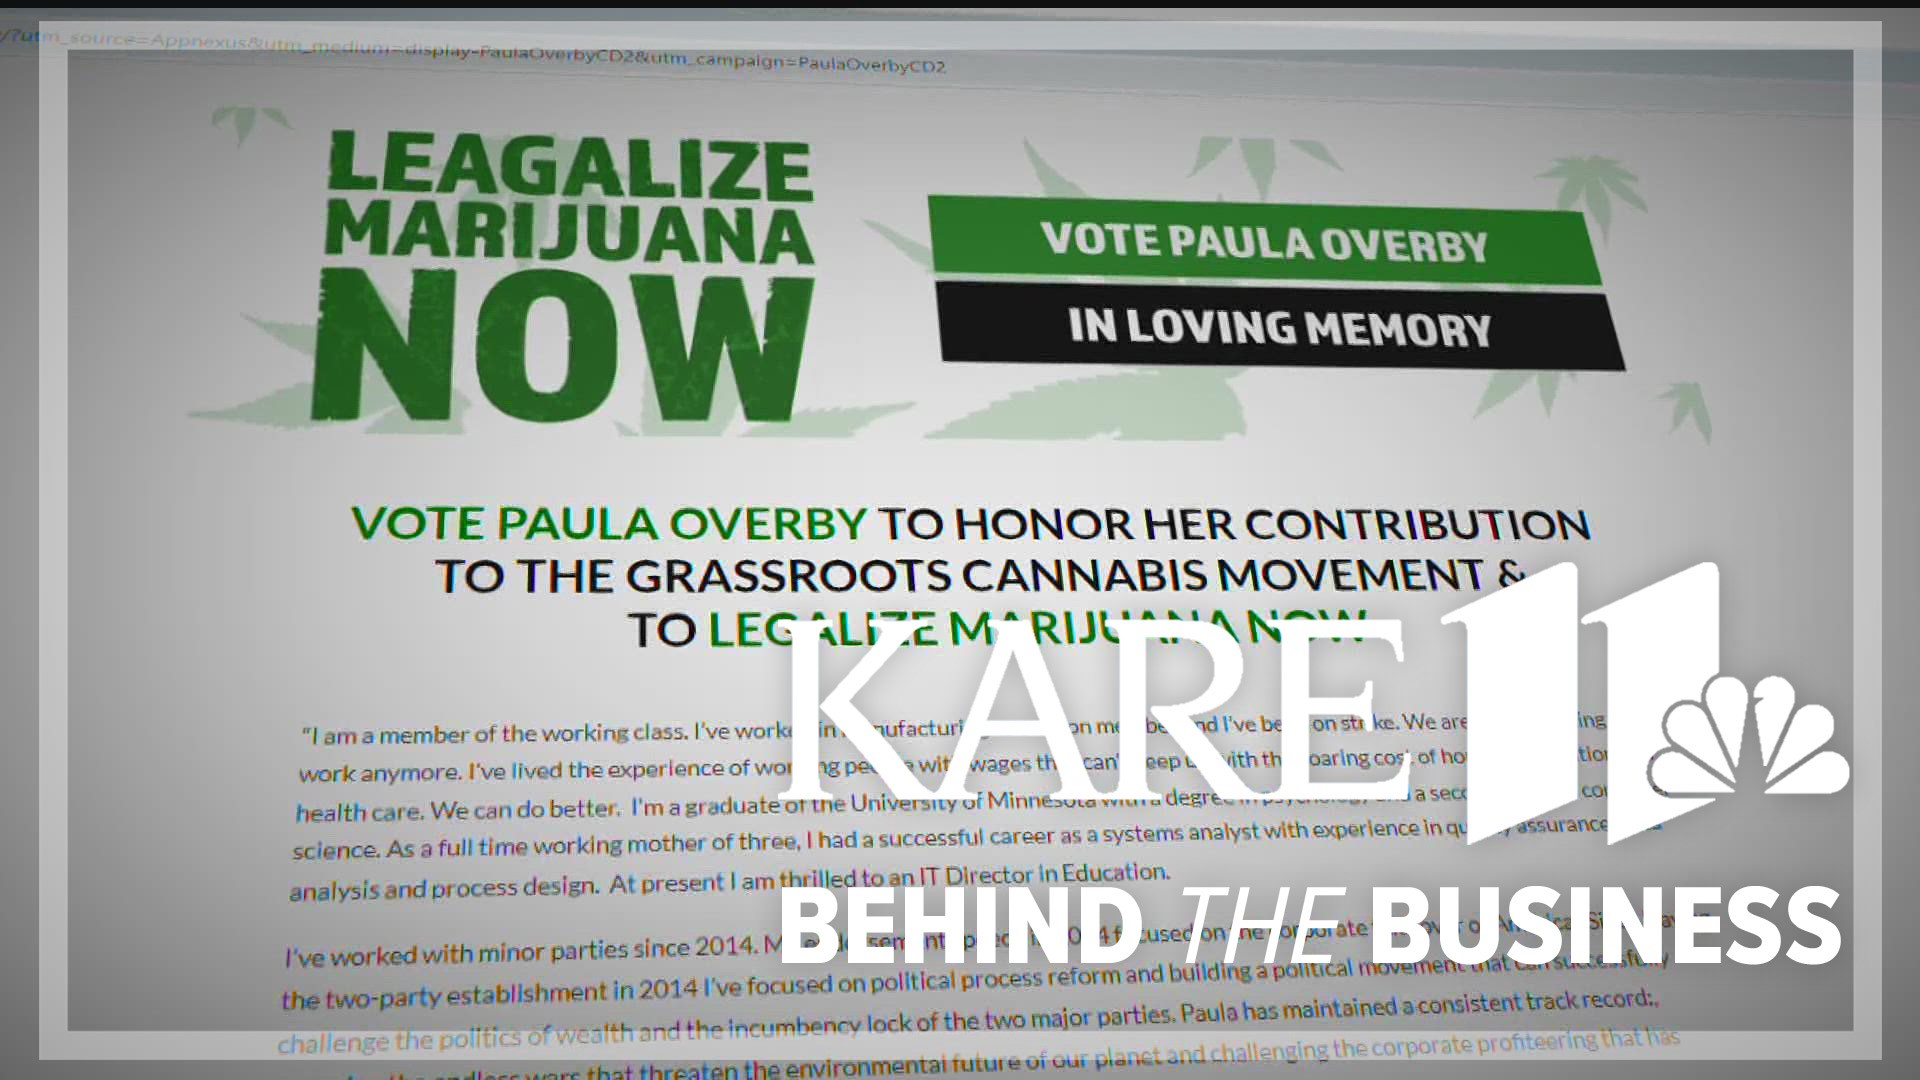 The ad is encouraging people living in the Second Congressional District to vote for Paula Overby, who died from heart complications in early October.